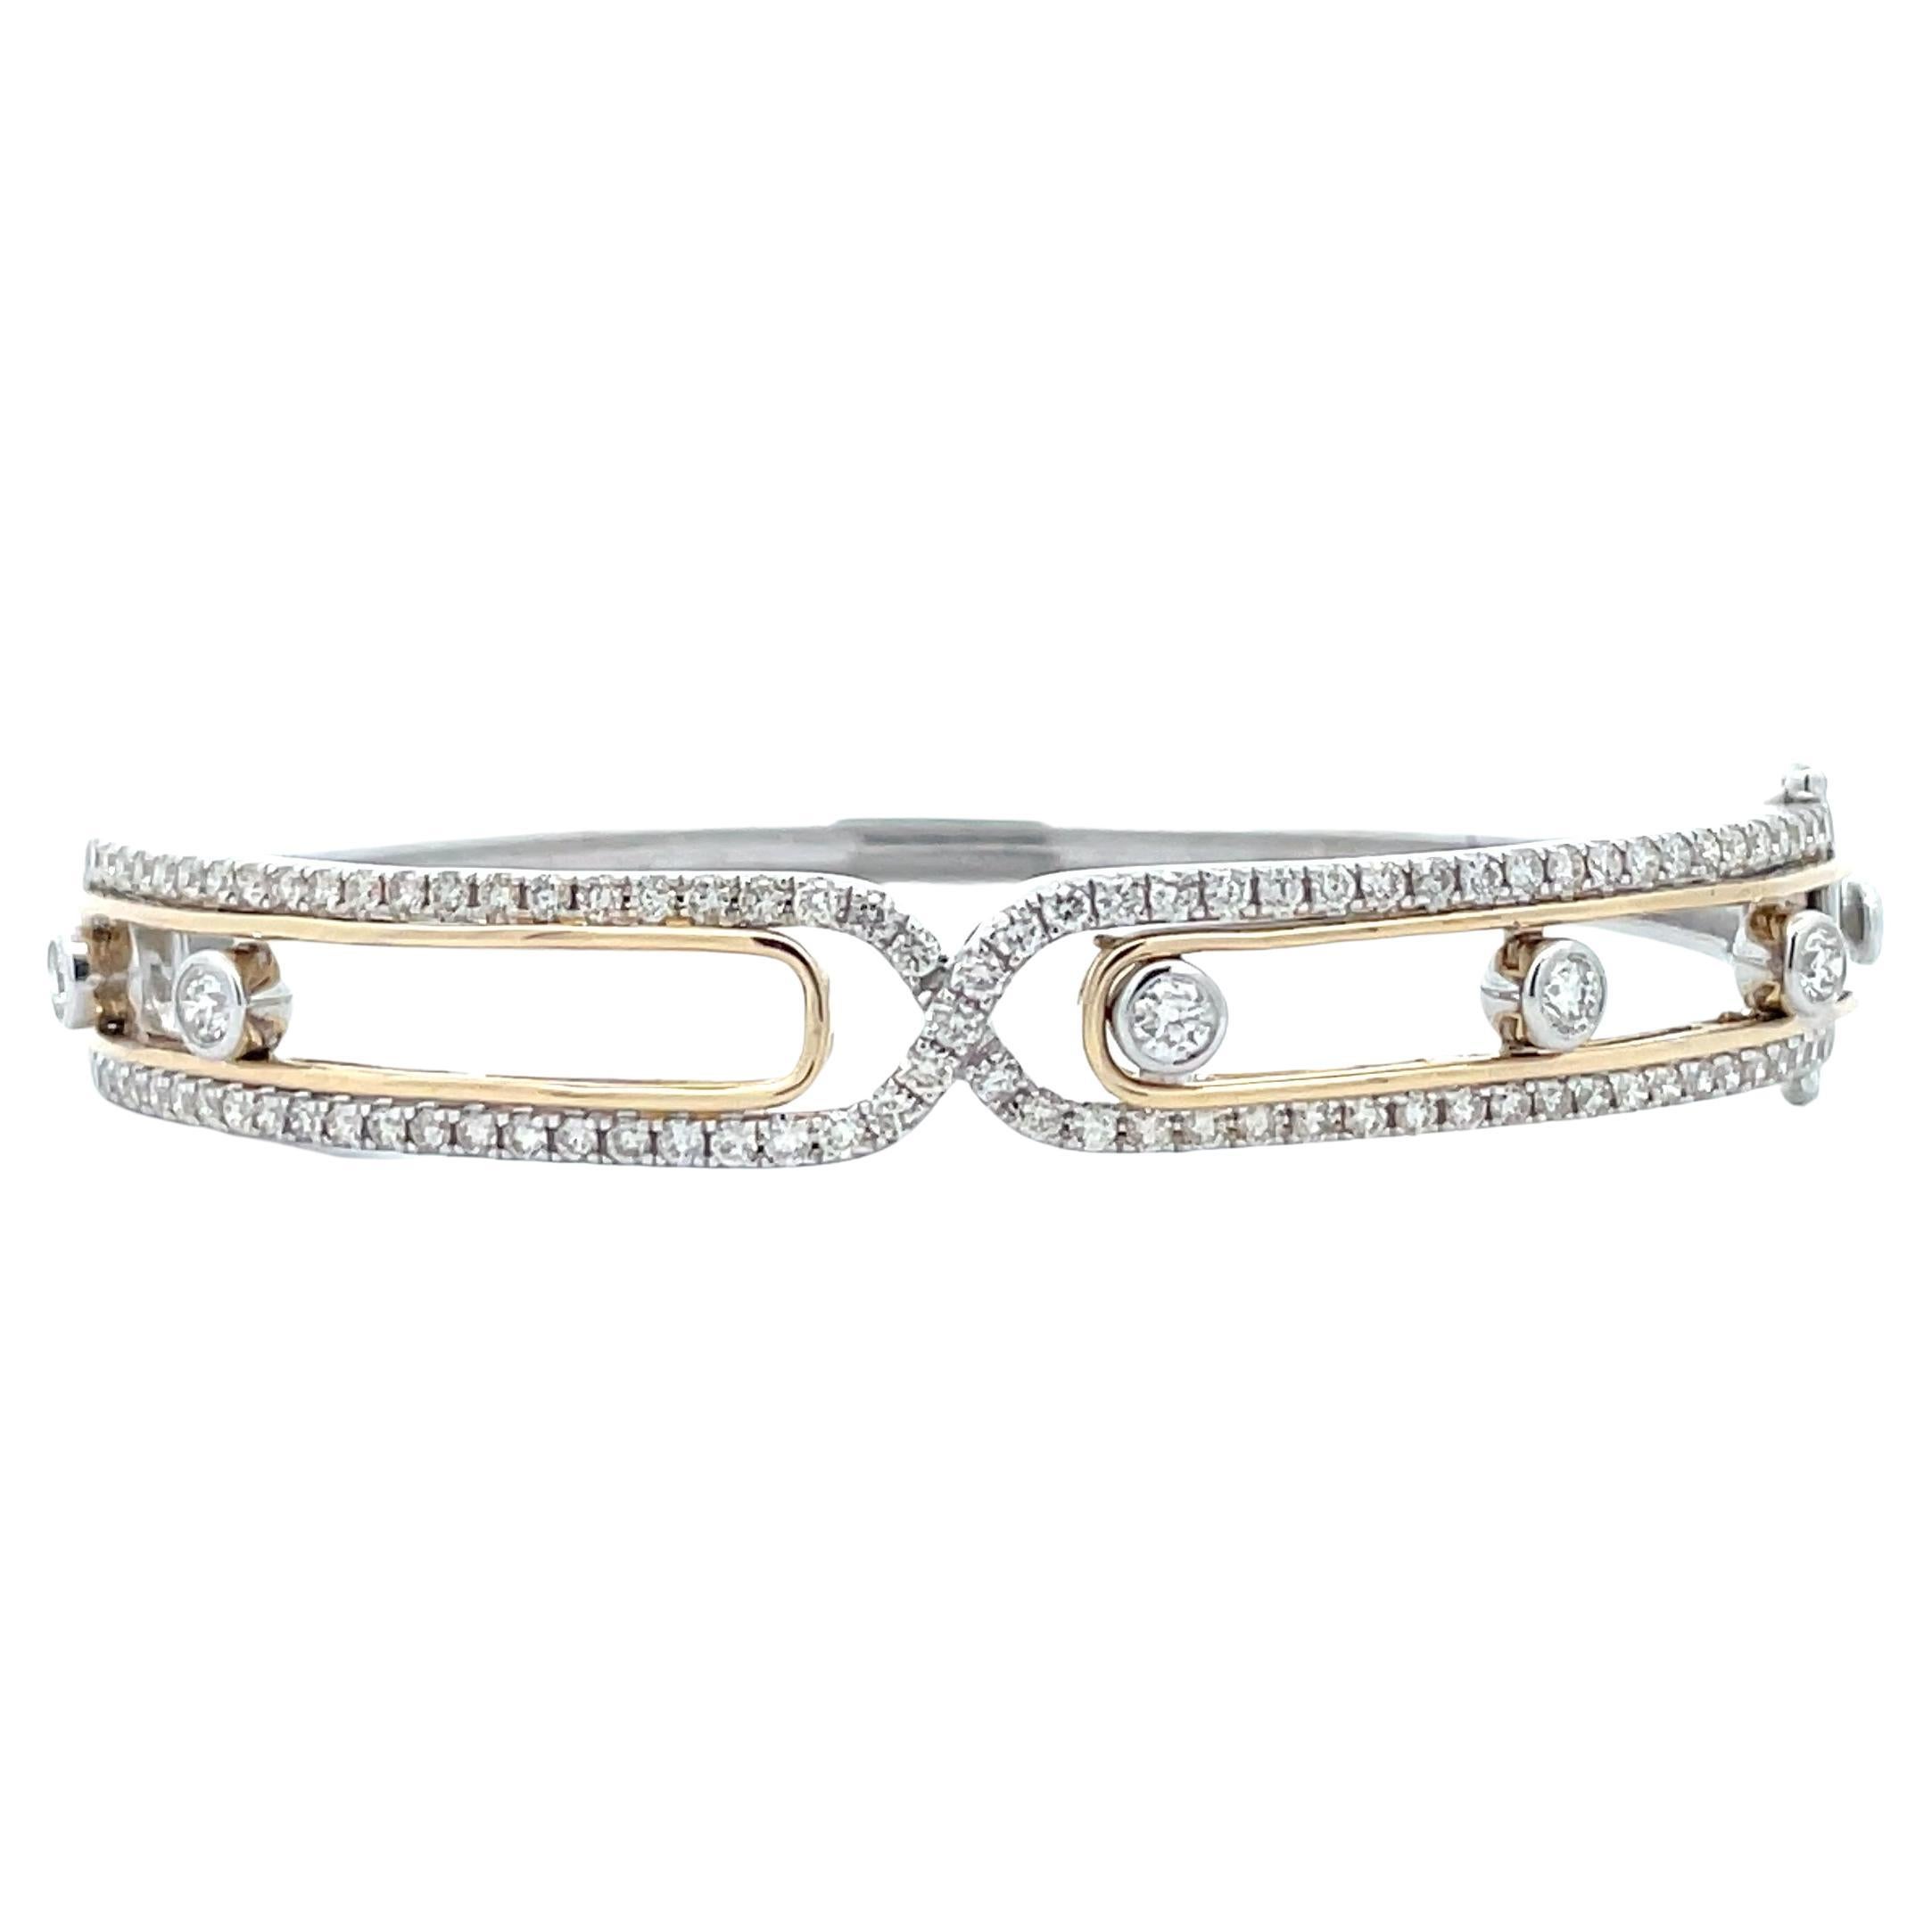 1.79 Carat Criss-Cross Floating Diamond 14k Solid Gold Bangle in 2-Tone Gold